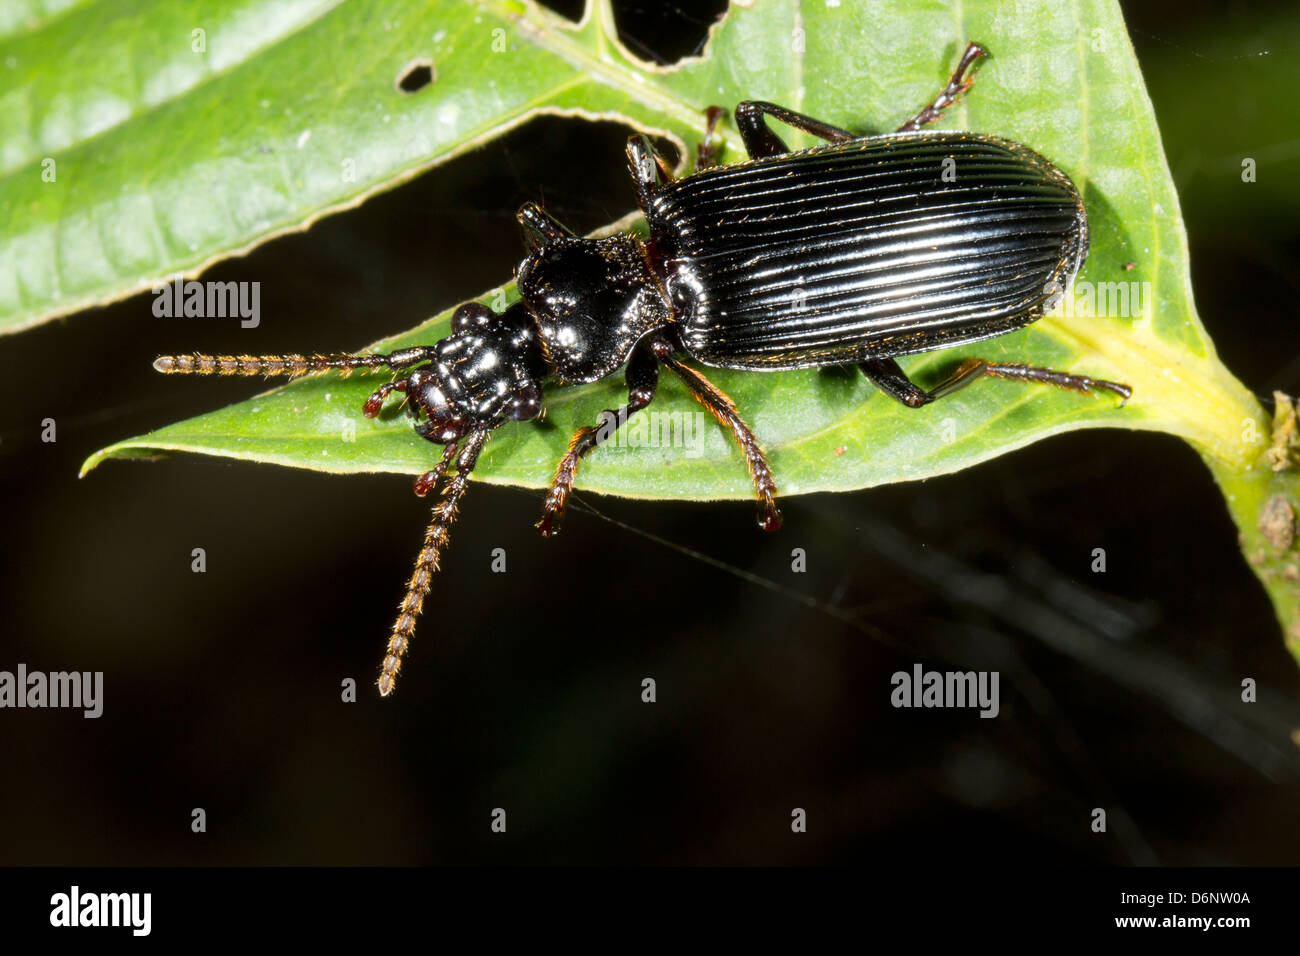 A very large ground beetle (family Carabidae) climing in vegetation in the rainforest, Ecuador Stock Photo